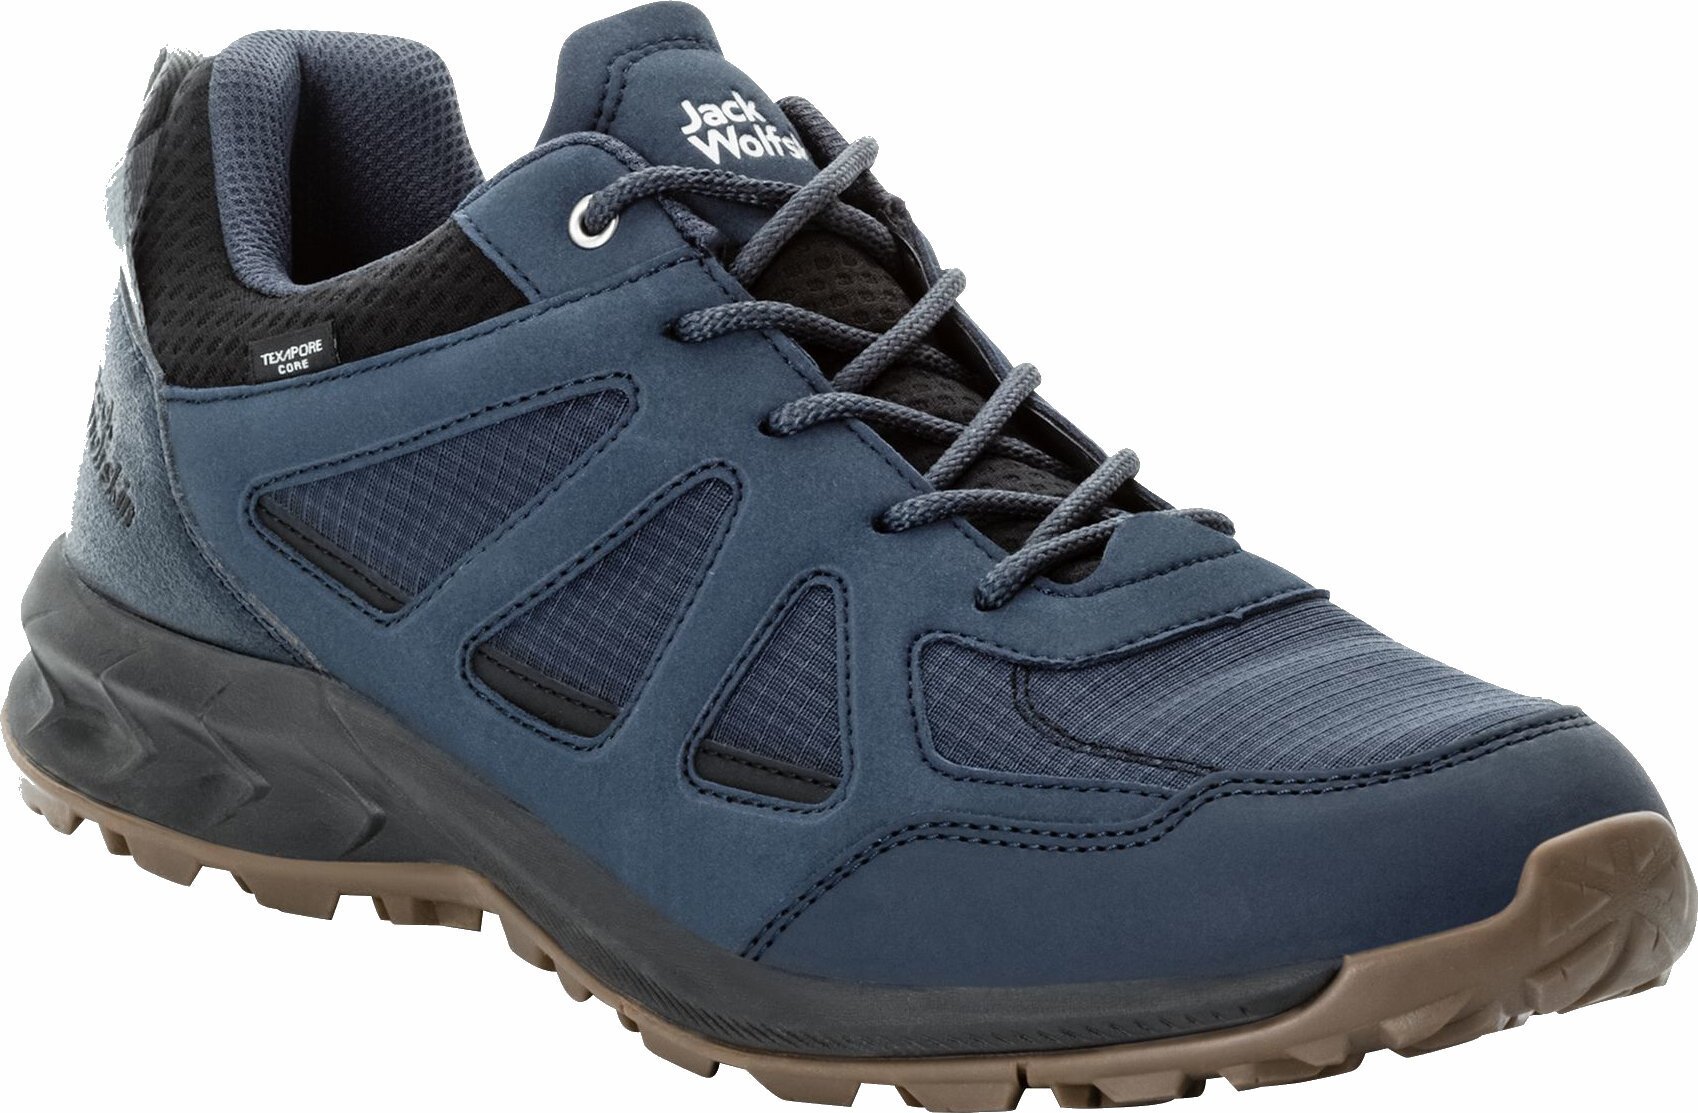 Mens Outdoor Shoes Jack Wolfskin Woodland 2 Texapore Low M Night Blue 45 Mens Outdoor Shoes